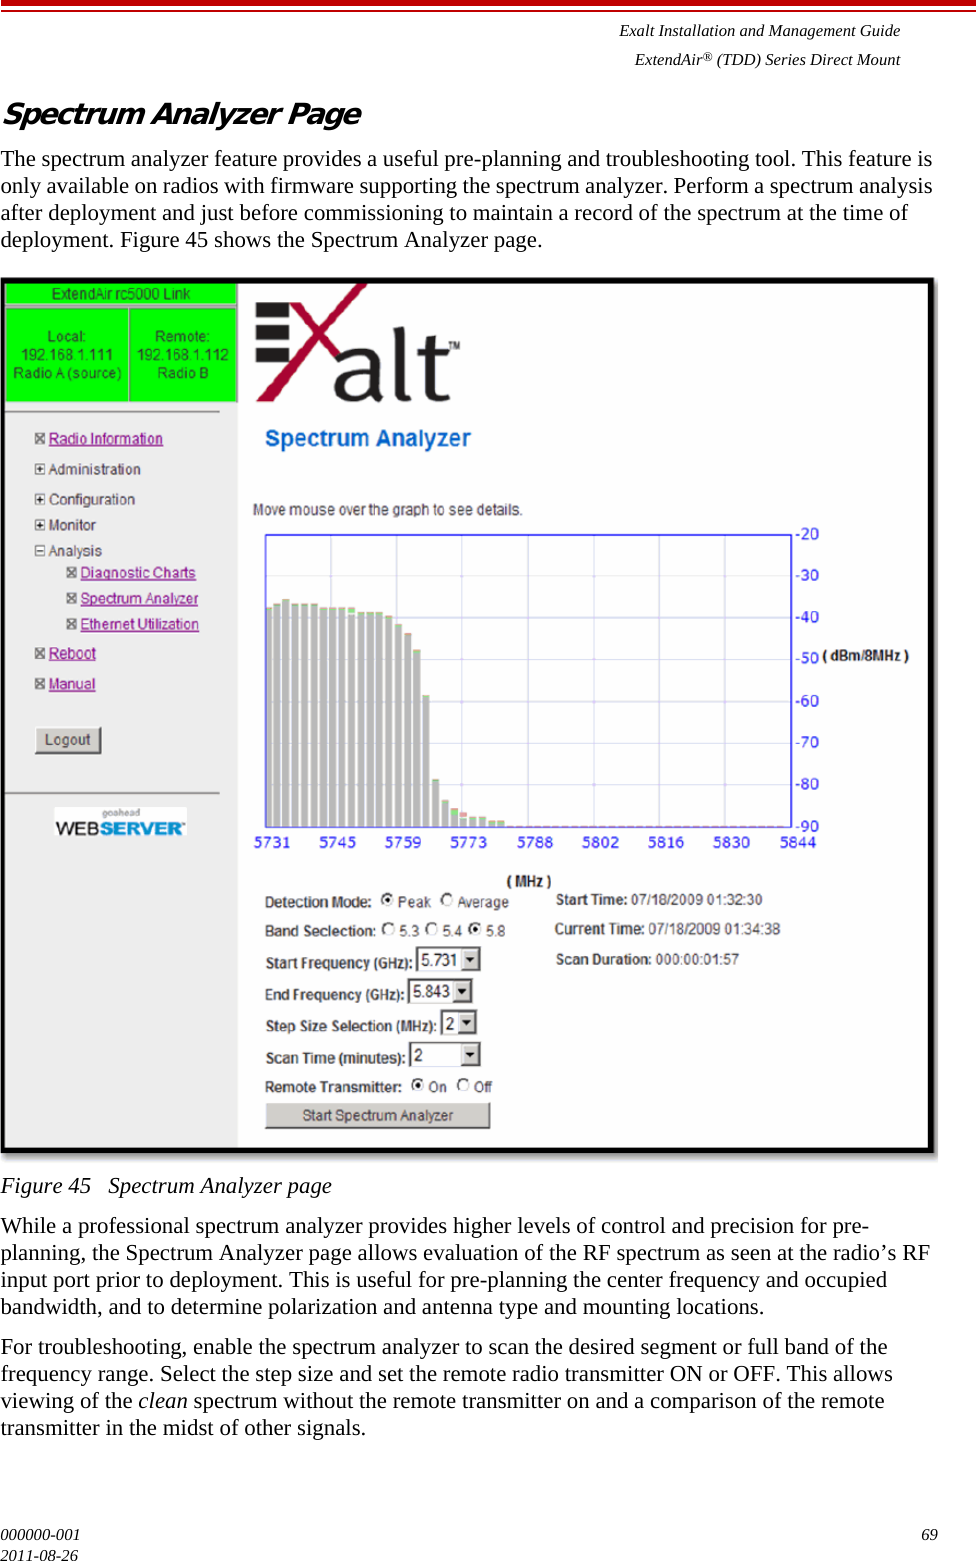 Exalt Installation and Management GuideExtendAir® (TDD) Series Direct Mount000000-001 692011-08-26Spectrum Analyzer PageThe spectrum analyzer feature provides a useful pre-planning and troubleshooting tool. This feature is only available on radios with firmware supporting the spectrum analyzer. Perform a spectrum analysis after deployment and just before commissioning to maintain a record of the spectrum at the time of deployment. Figure 45 shows the Spectrum Analyzer page.Figure 45   Spectrum Analyzer pageWhile a professional spectrum analyzer provides higher levels of control and precision for pre-planning, the Spectrum Analyzer page allows evaluation of the RF spectrum as seen at the radio’s RF input port prior to deployment. This is useful for pre-planning the center frequency and occupied bandwidth, and to determine polarization and antenna type and mounting locations. For troubleshooting, enable the spectrum analyzer to scan the desired segment or full band of the frequency range. Select the step size and set the remote radio transmitter ON or OFF. This allows viewing of the clean spectrum without the remote transmitter on and a comparison of the remote transmitter in the midst of other signals.